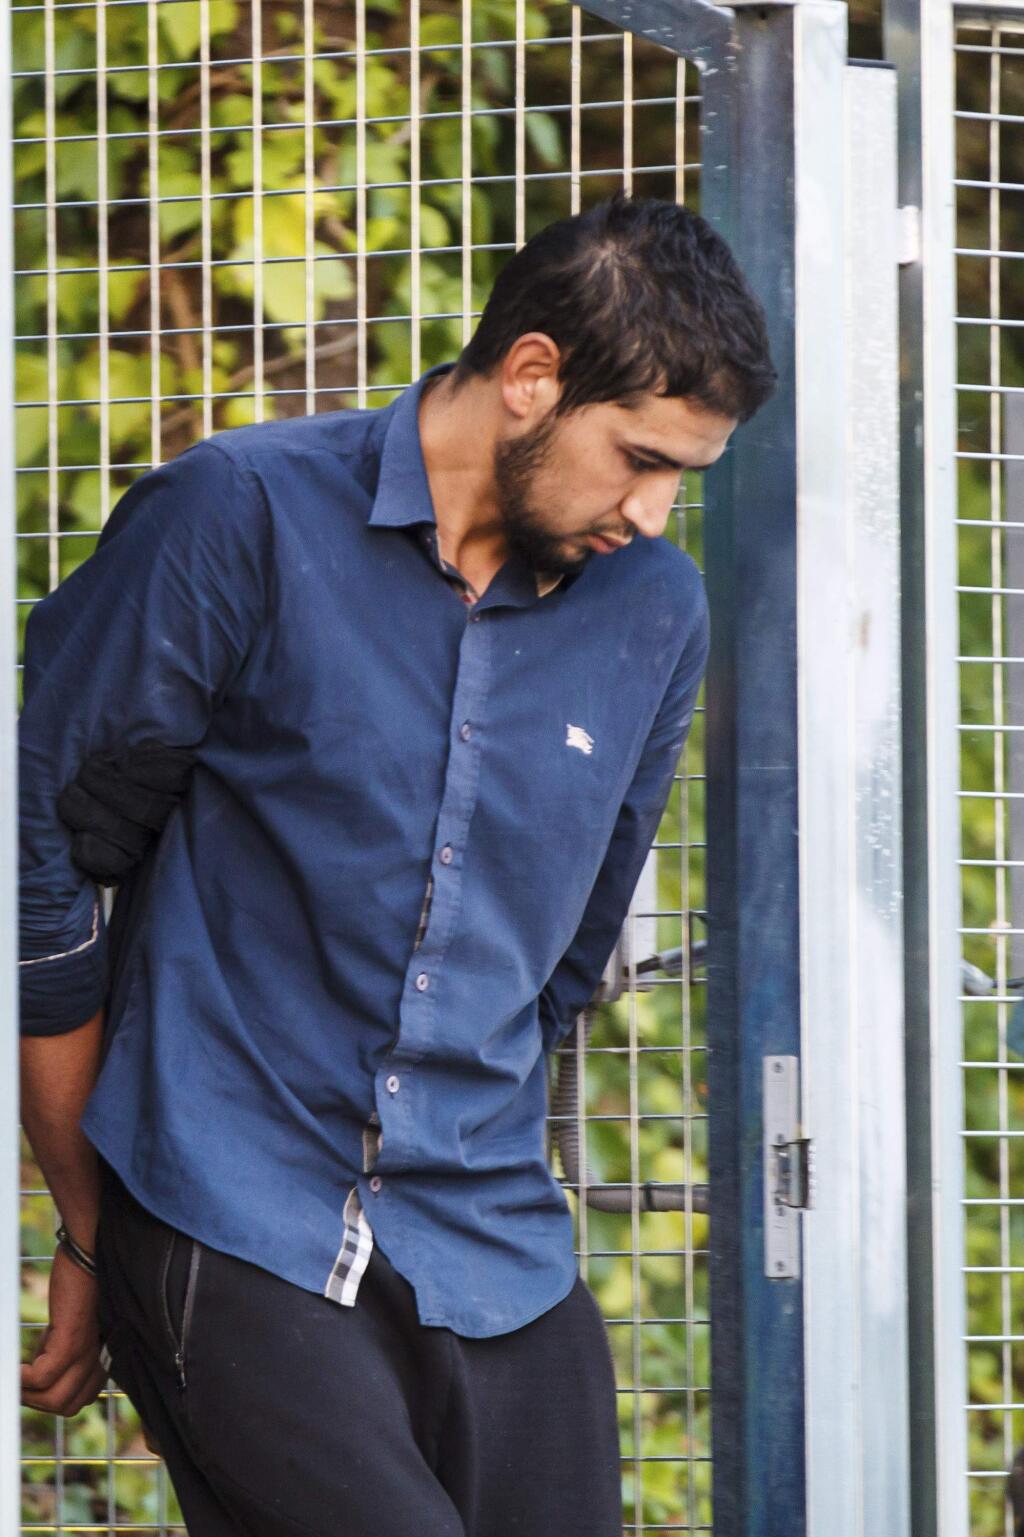 Un-named alleged member of a terror cell accused of killing 15 people in attacks in Barcelona leaves a Civil Guard base on the outskirts of Madrid before appearing in court in Madrid, Spain, Tuesday Aug. 22, 2017. Four men were arrested last week for their alleged involvement in the planning or execution of attacks in Barcelona on Thursday and the northeastern resort town of Cambrils early Friday.(AP Photo)